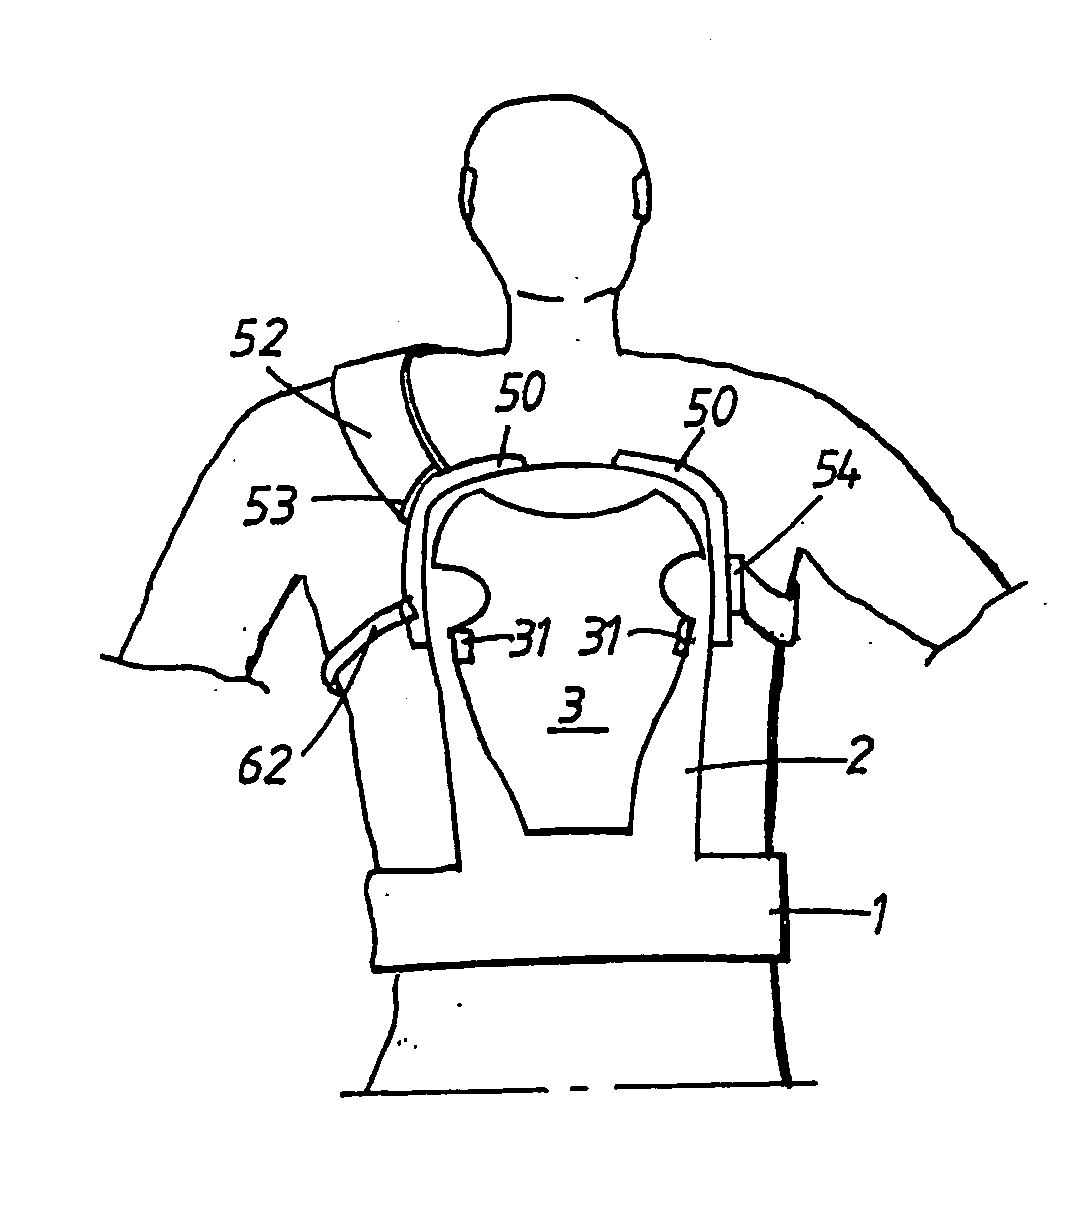 Child-carrying device